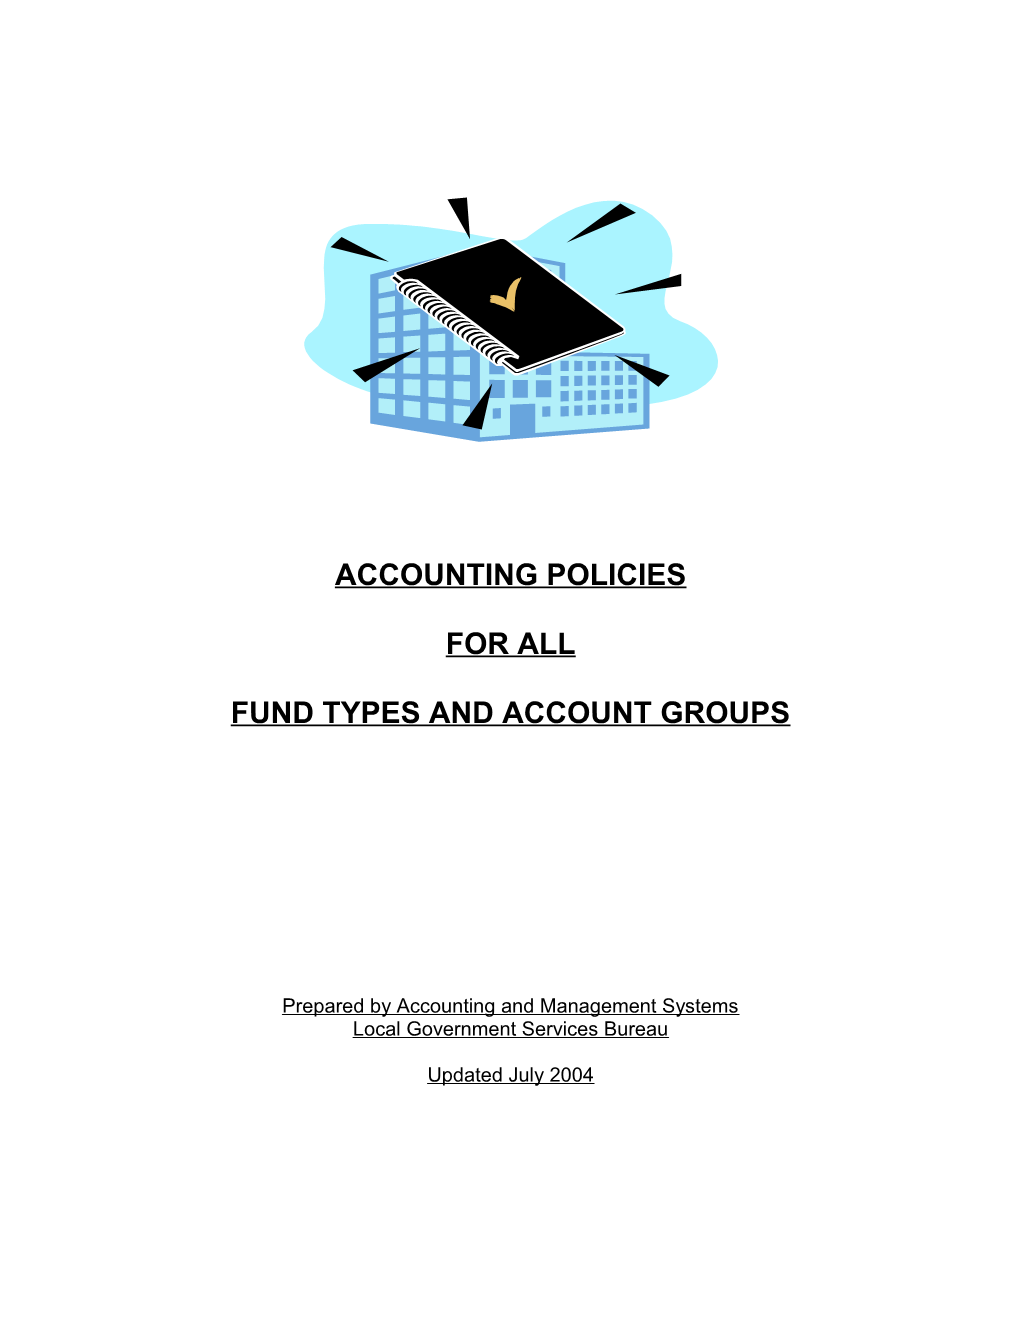 Fund Types and Account Groups